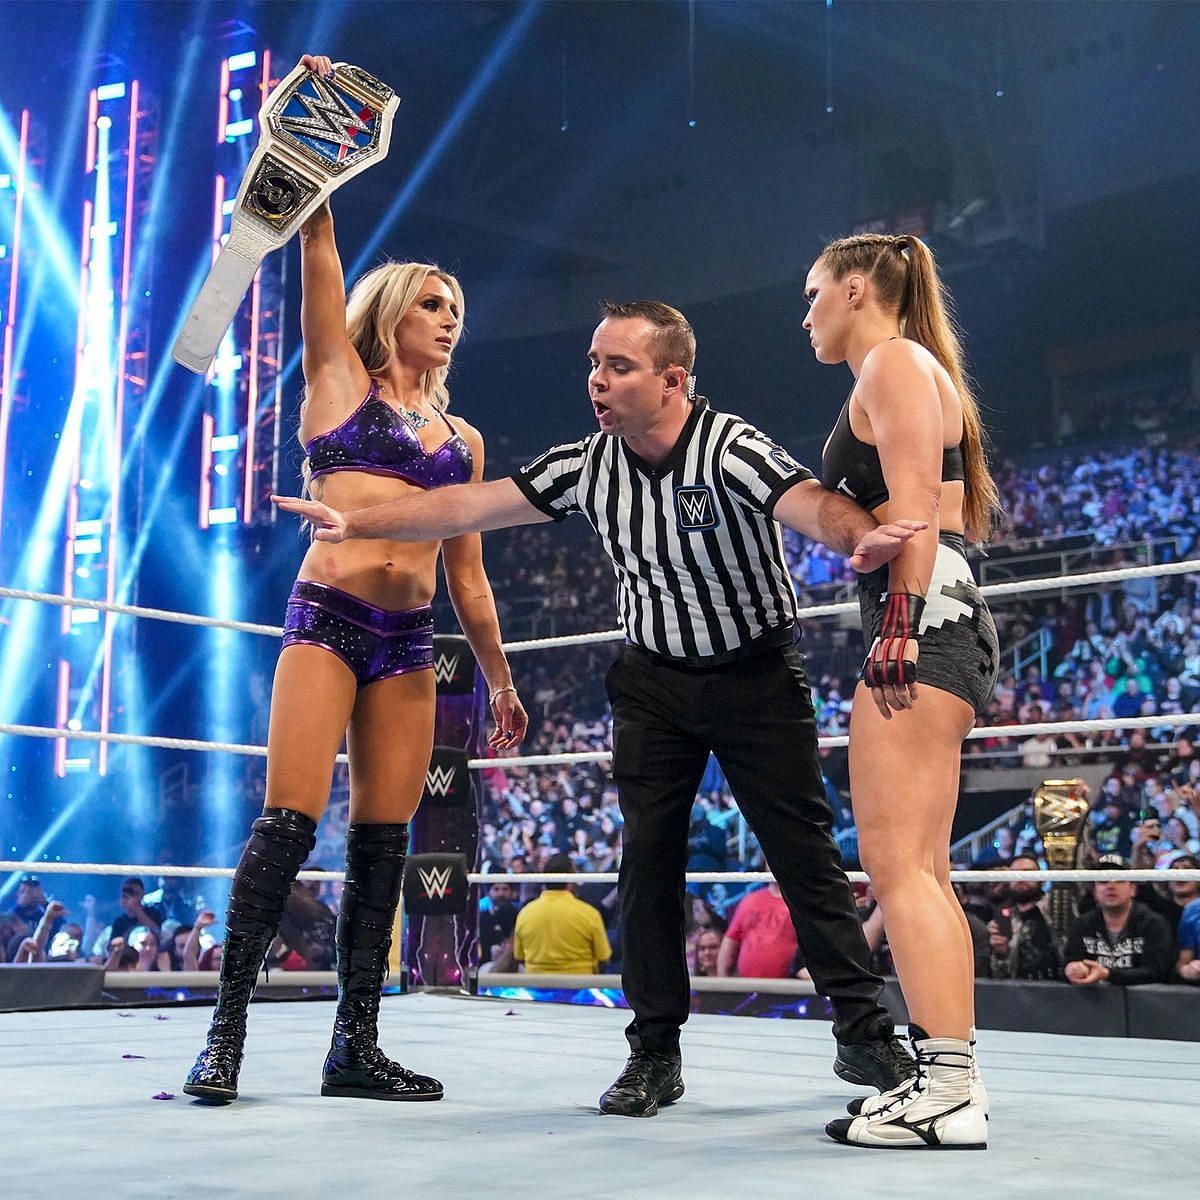 Charlotte Flair and Ronda Rousey dominated the SmackDown title scene in 2022.